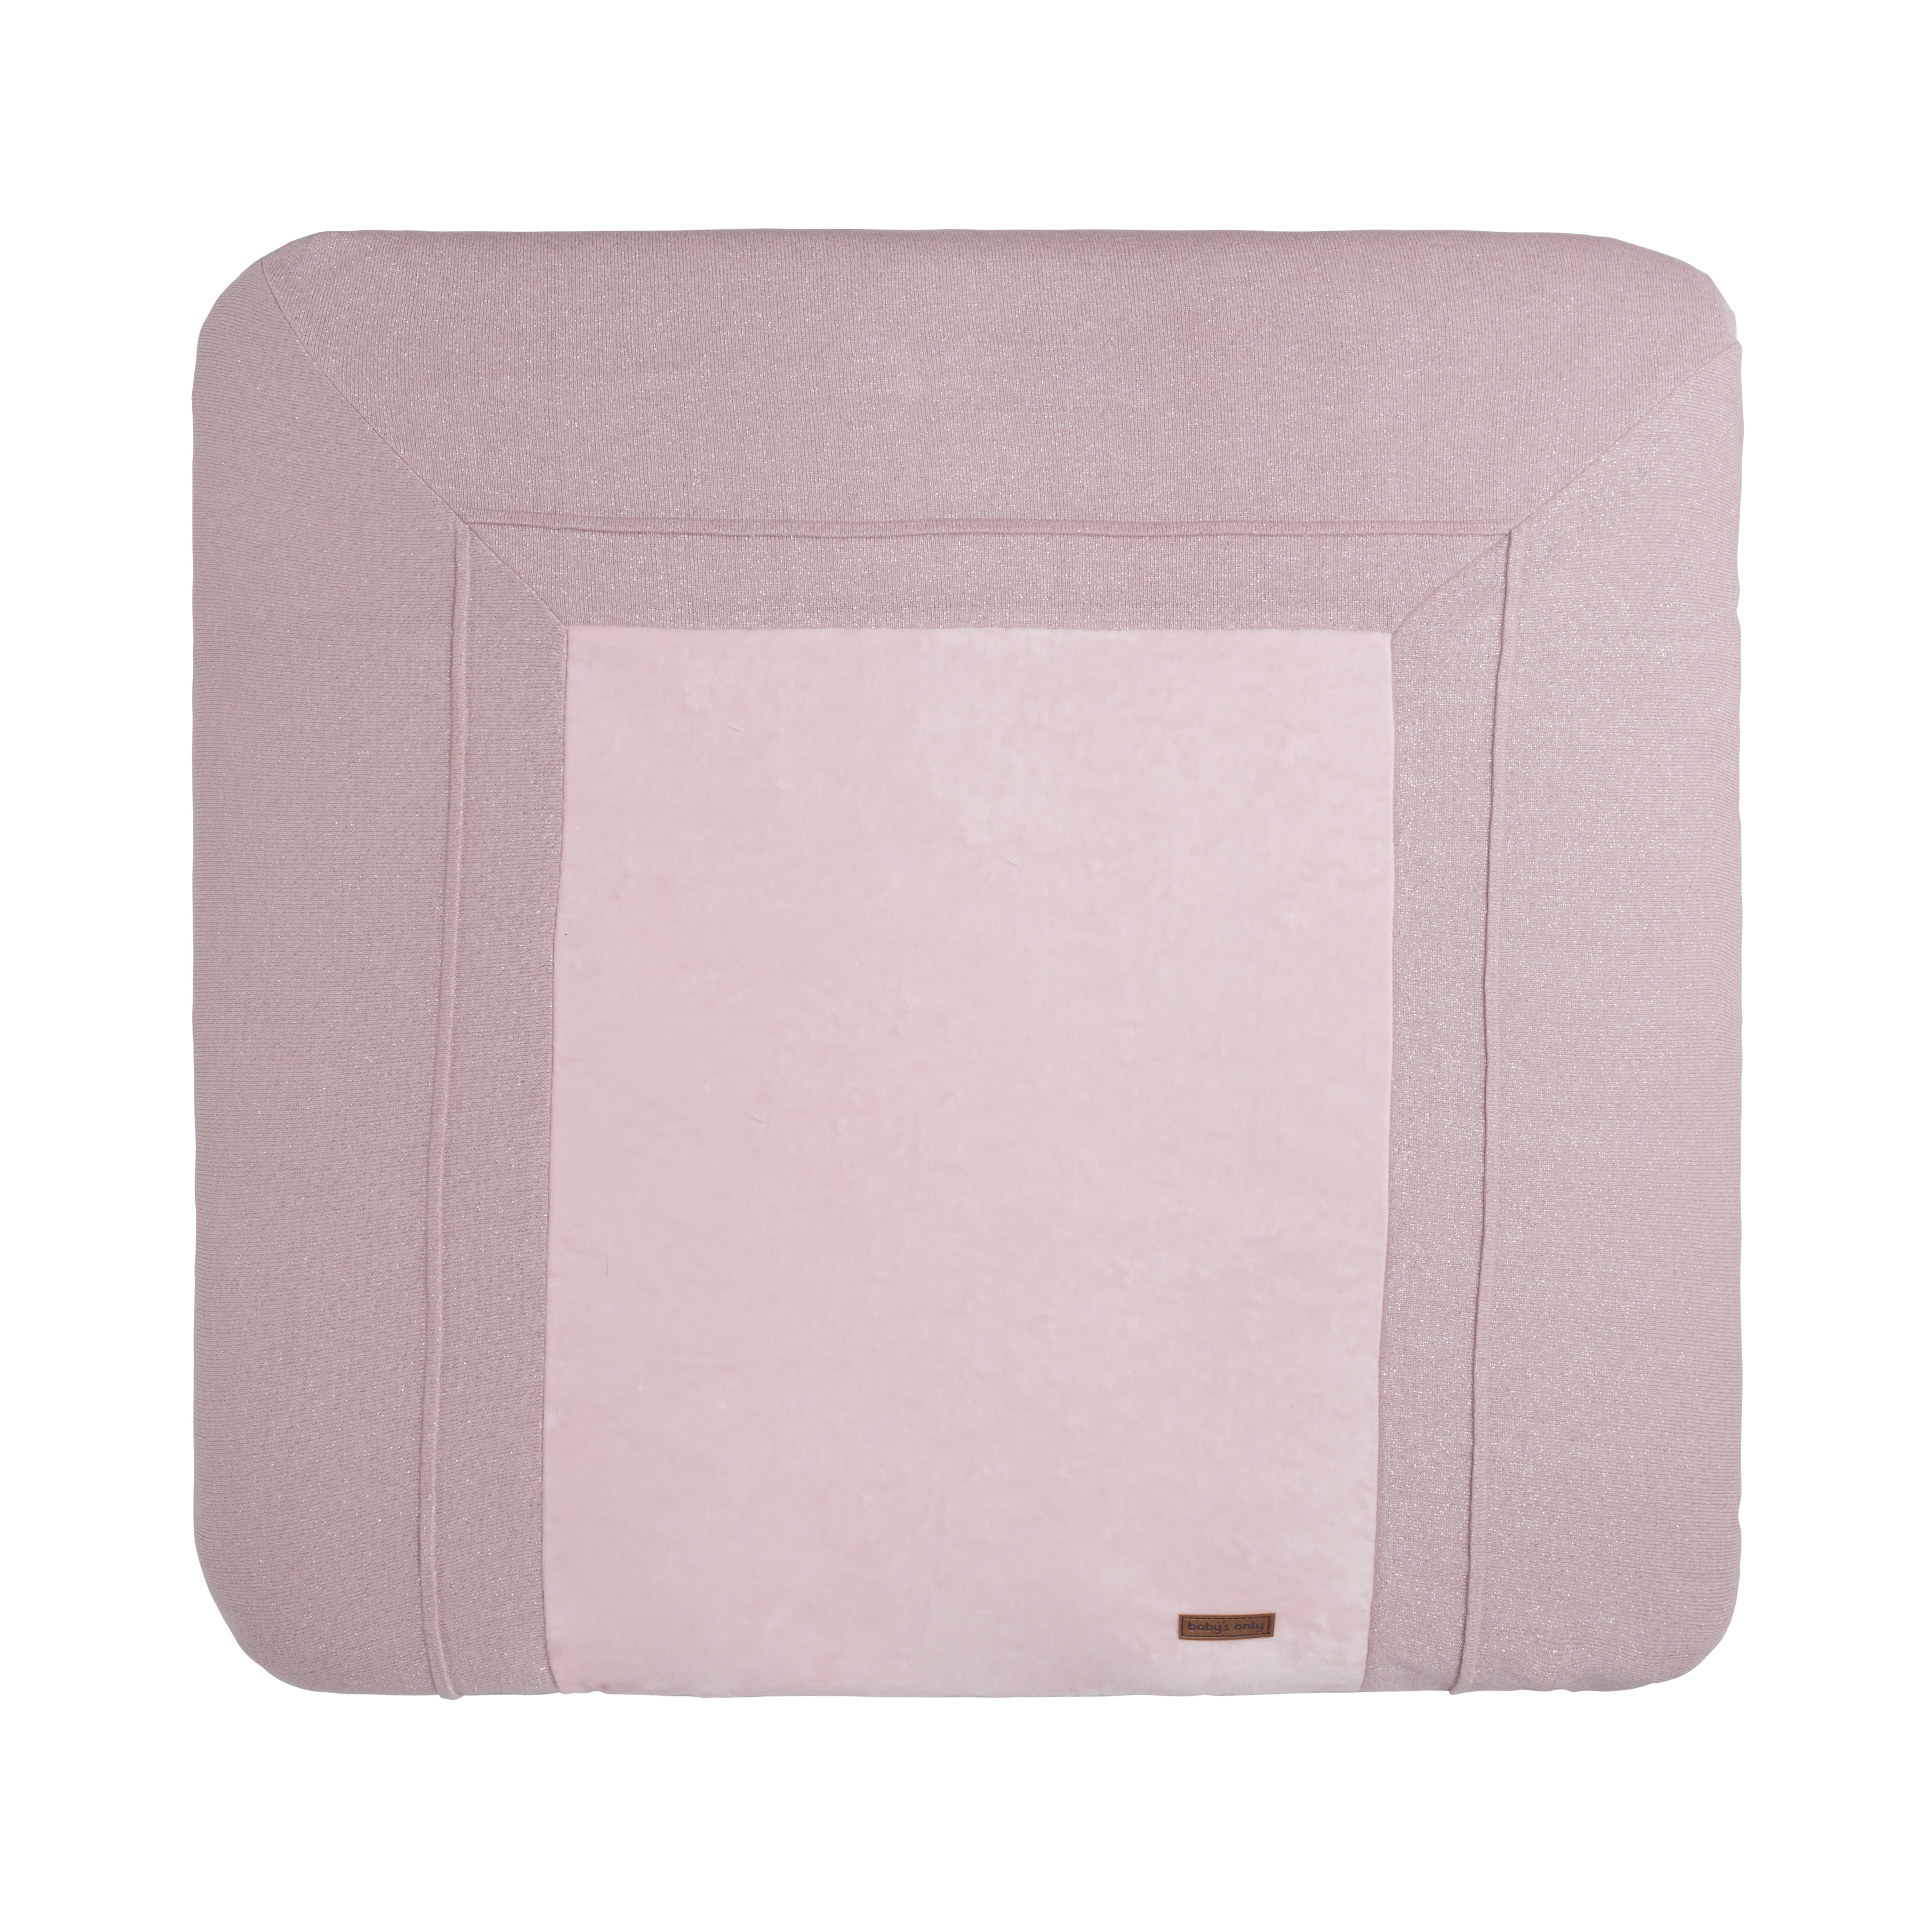 Changing pad cover Sparkle silver-pink melee - 75x85